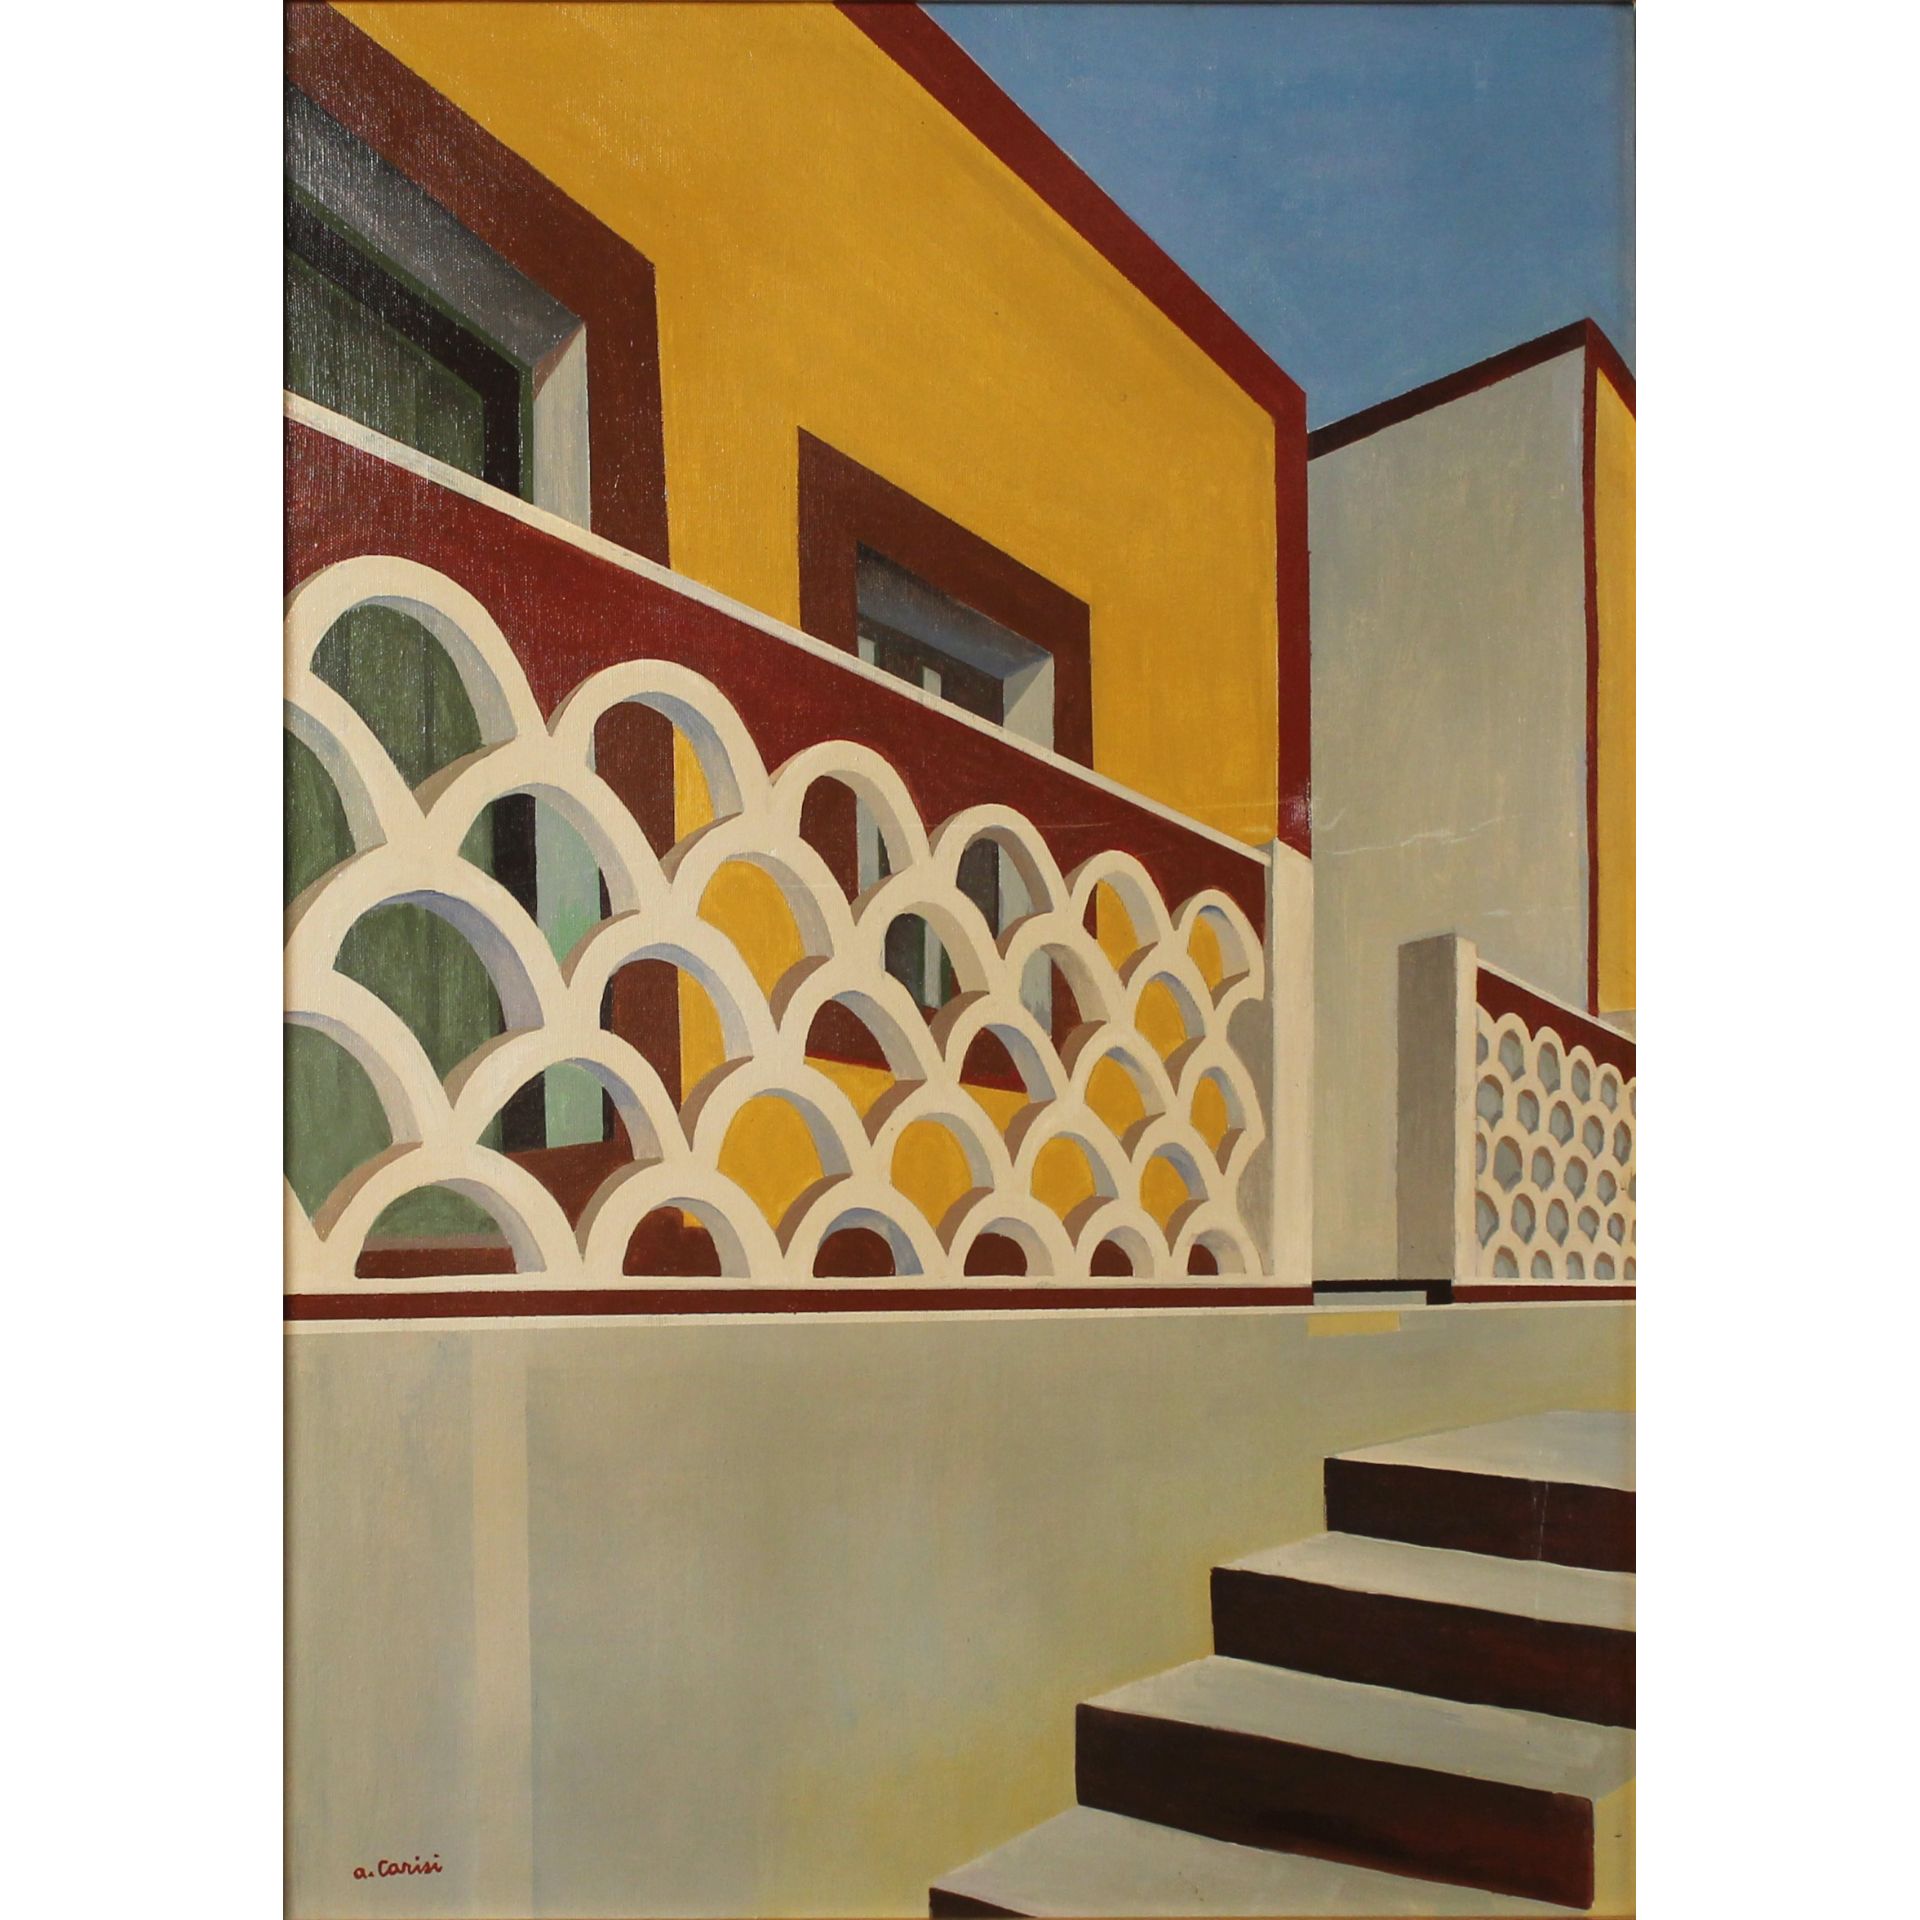 Andrea Carisi (1934) "Case a Linosa" - "Houses in Linosa"